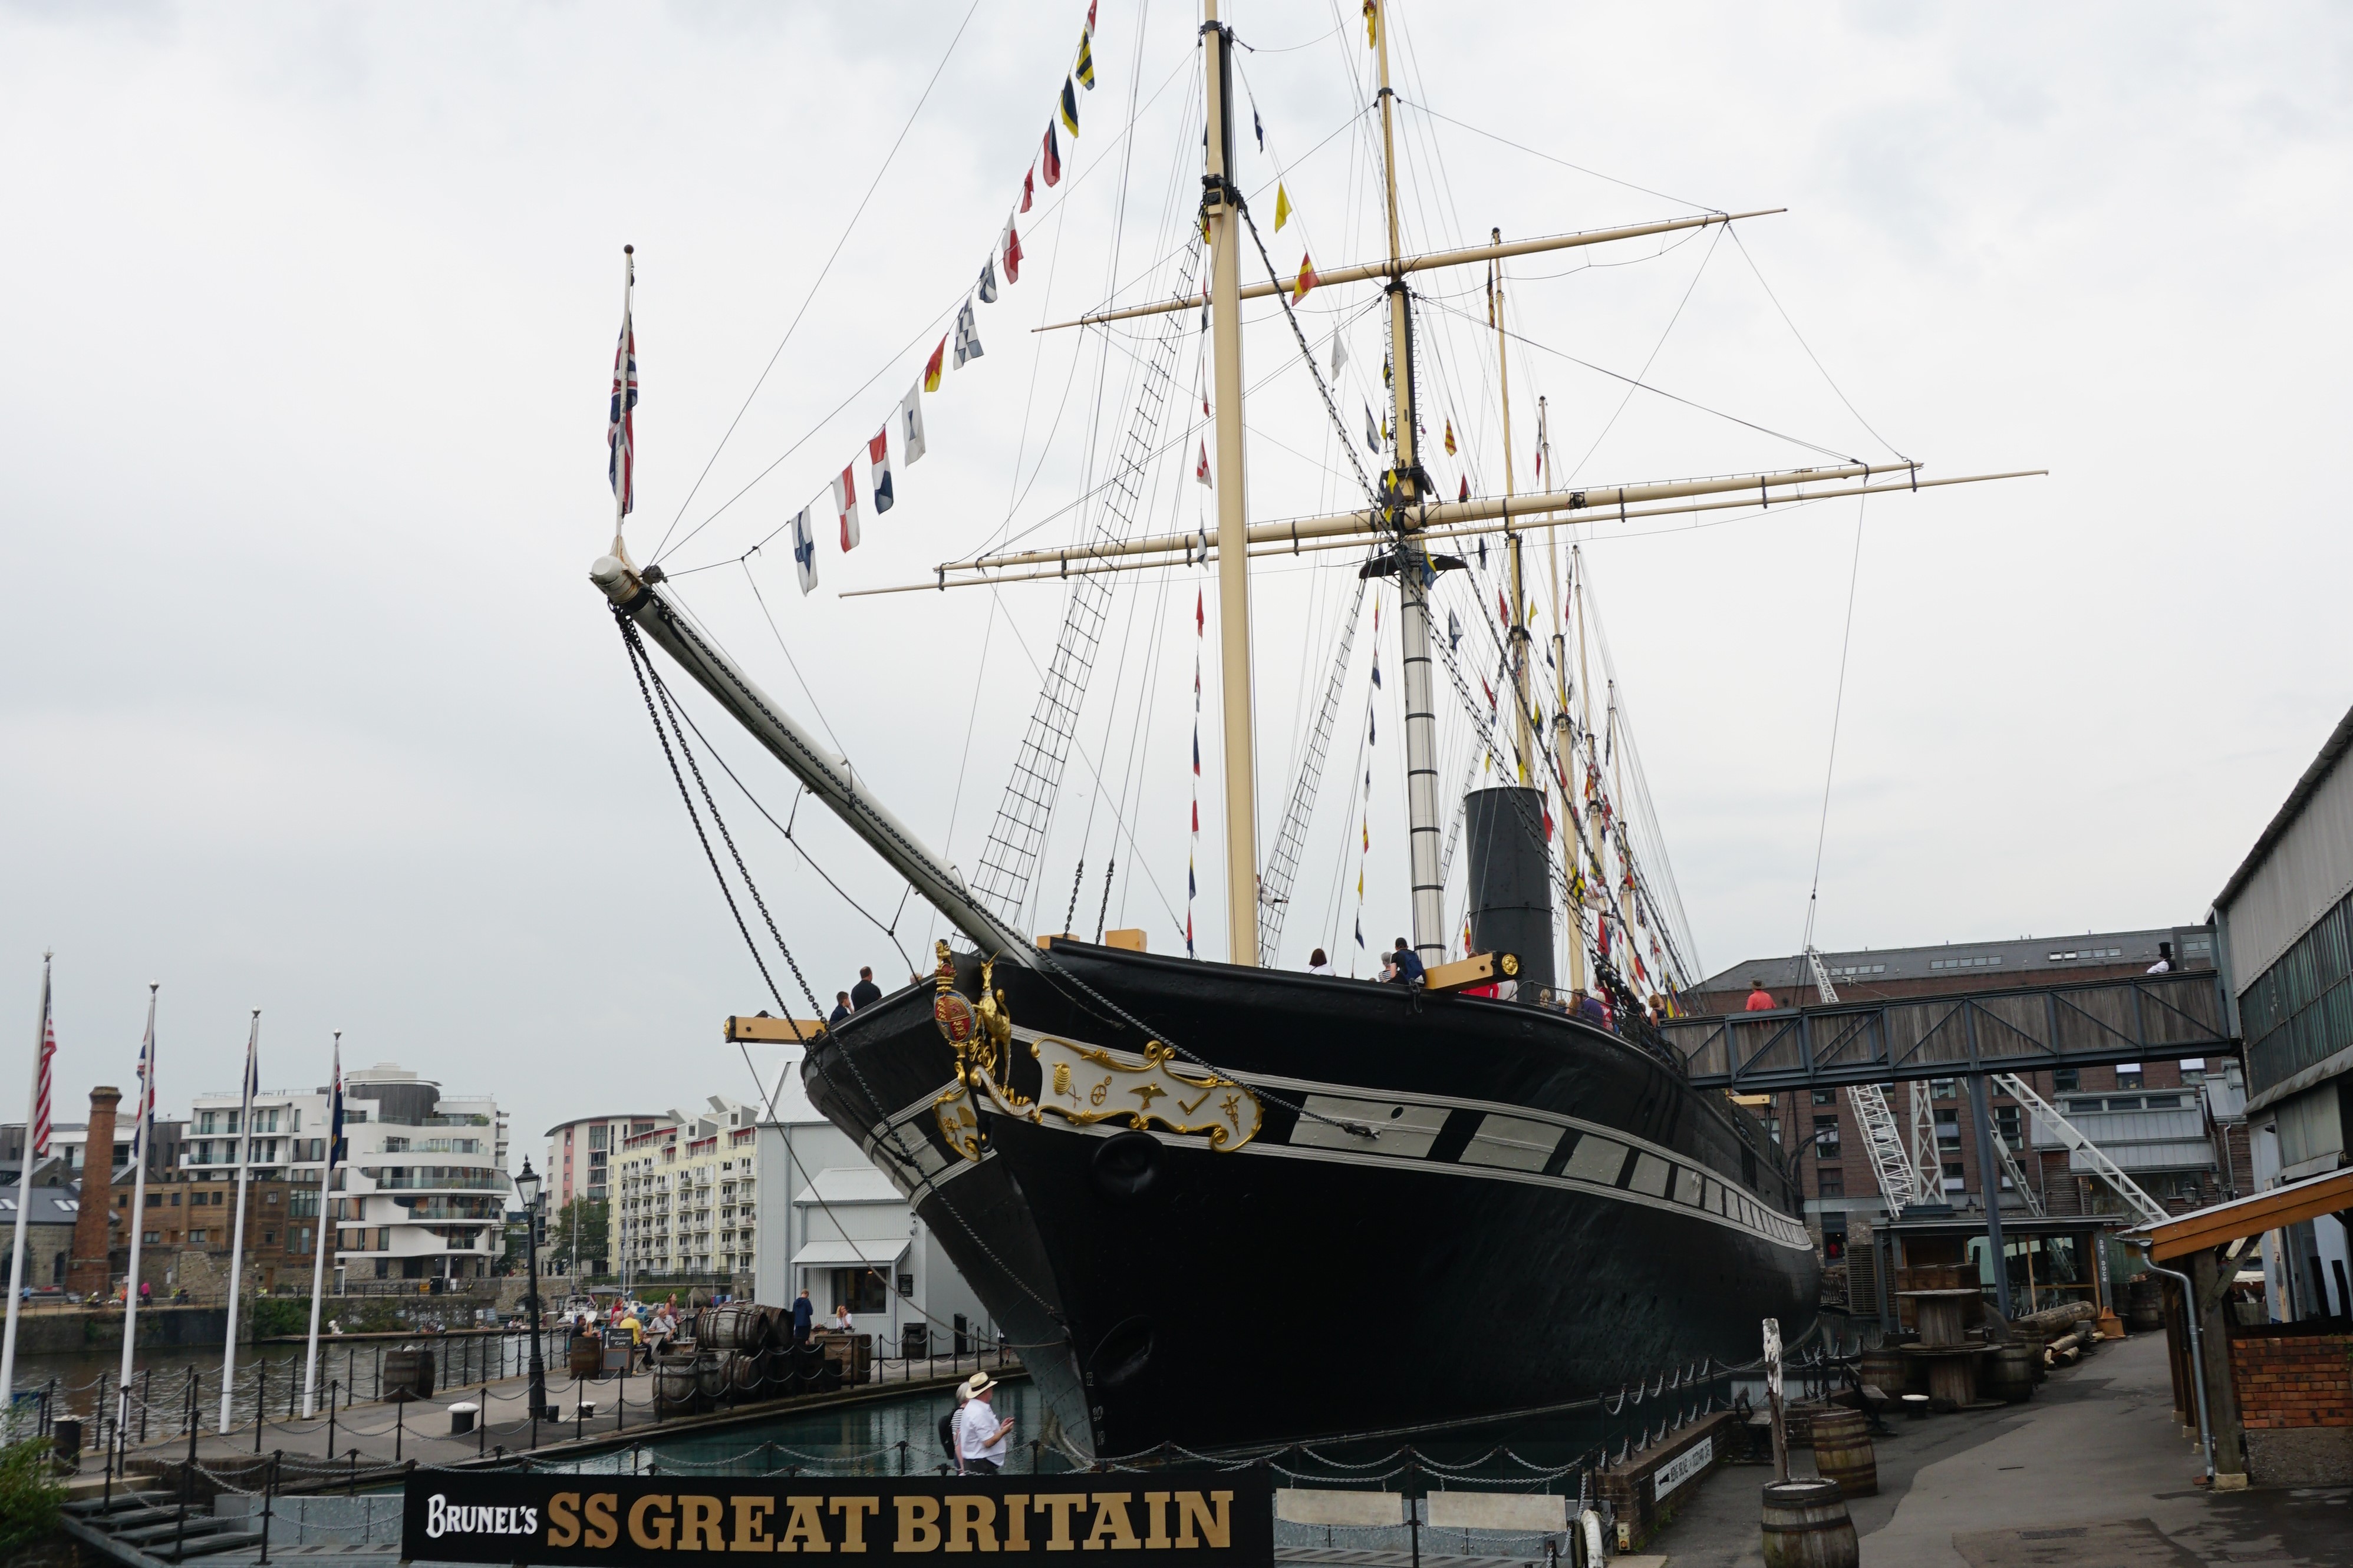 Brunels SS Great Britain